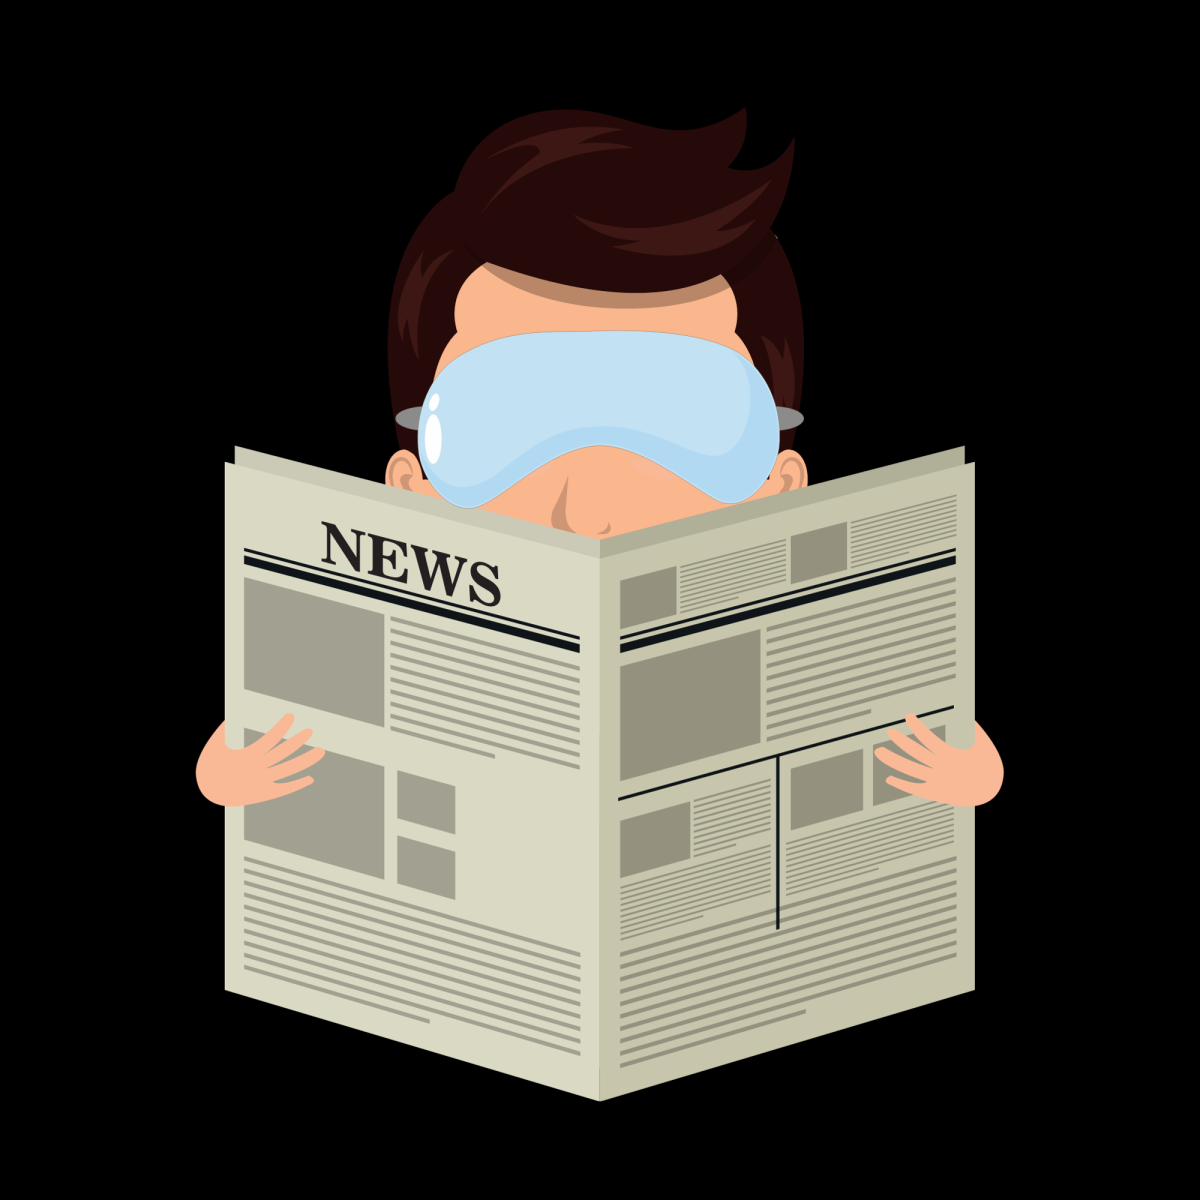 The ability to understand and engage with the news is an important skill for people in an information age to possess. May, however, do not and instead read the news as if they lack common sense or are wearing a blindfold.

- Made in Canva